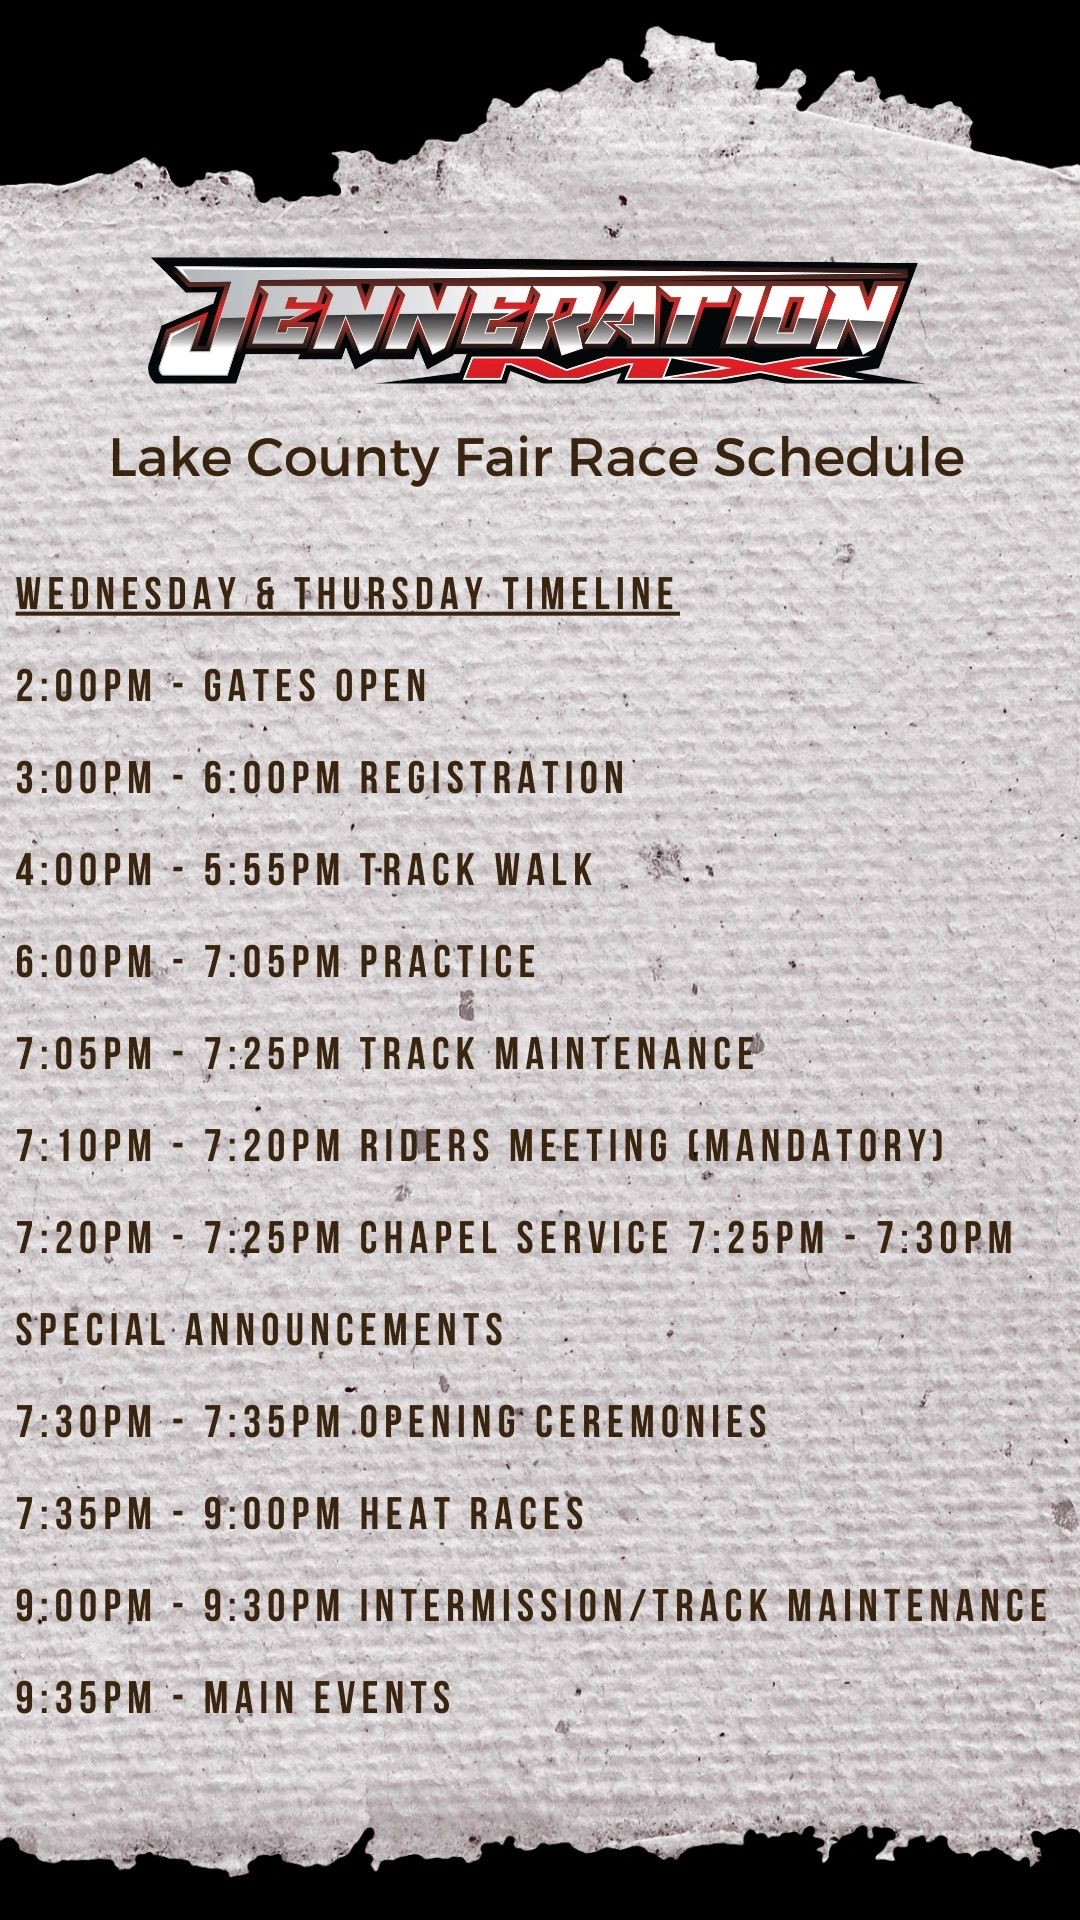 RACE DAY SCHEDULE